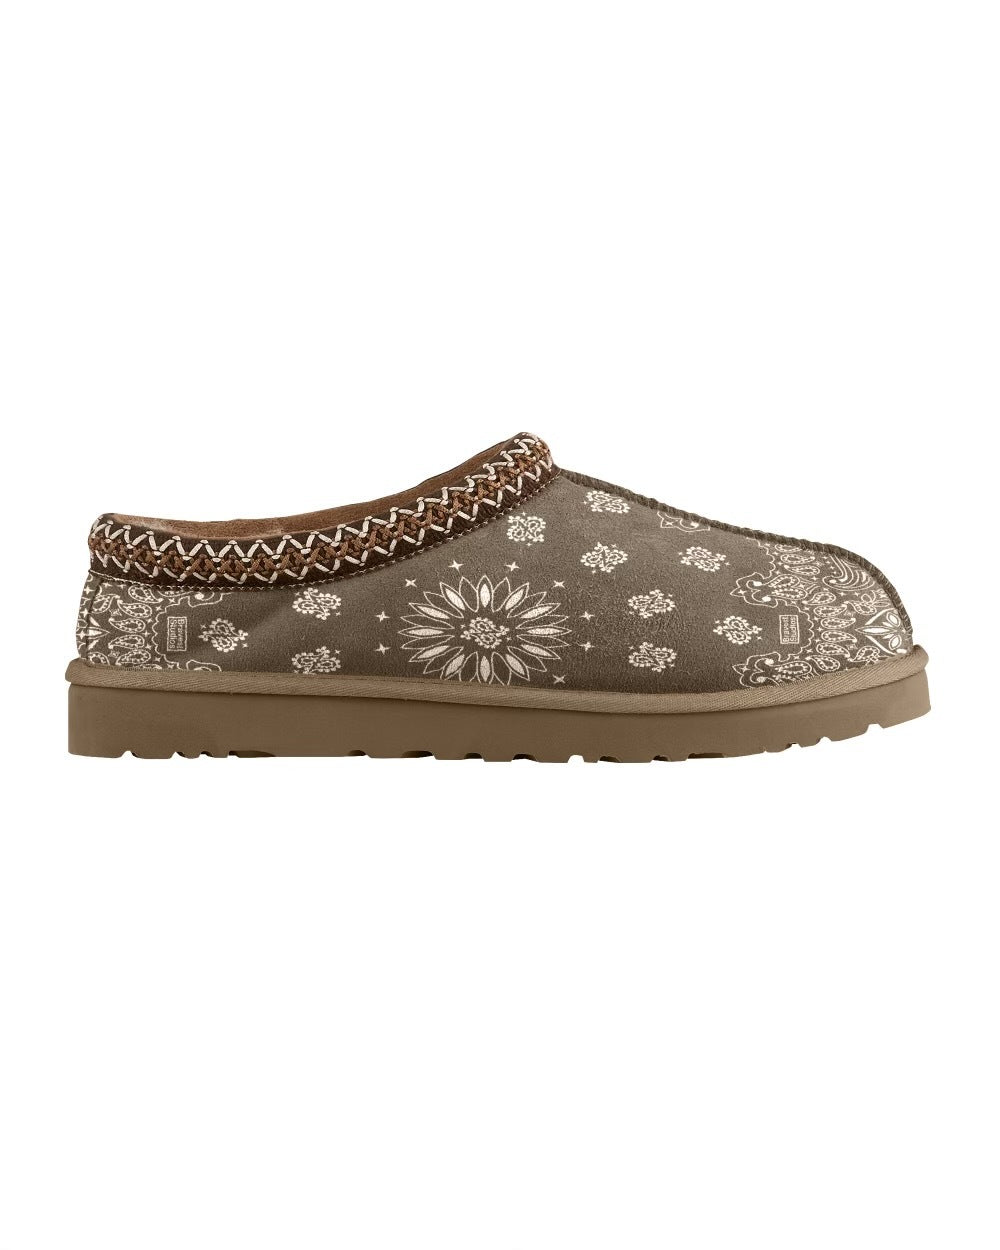 Cappuccino Paisley Slippers